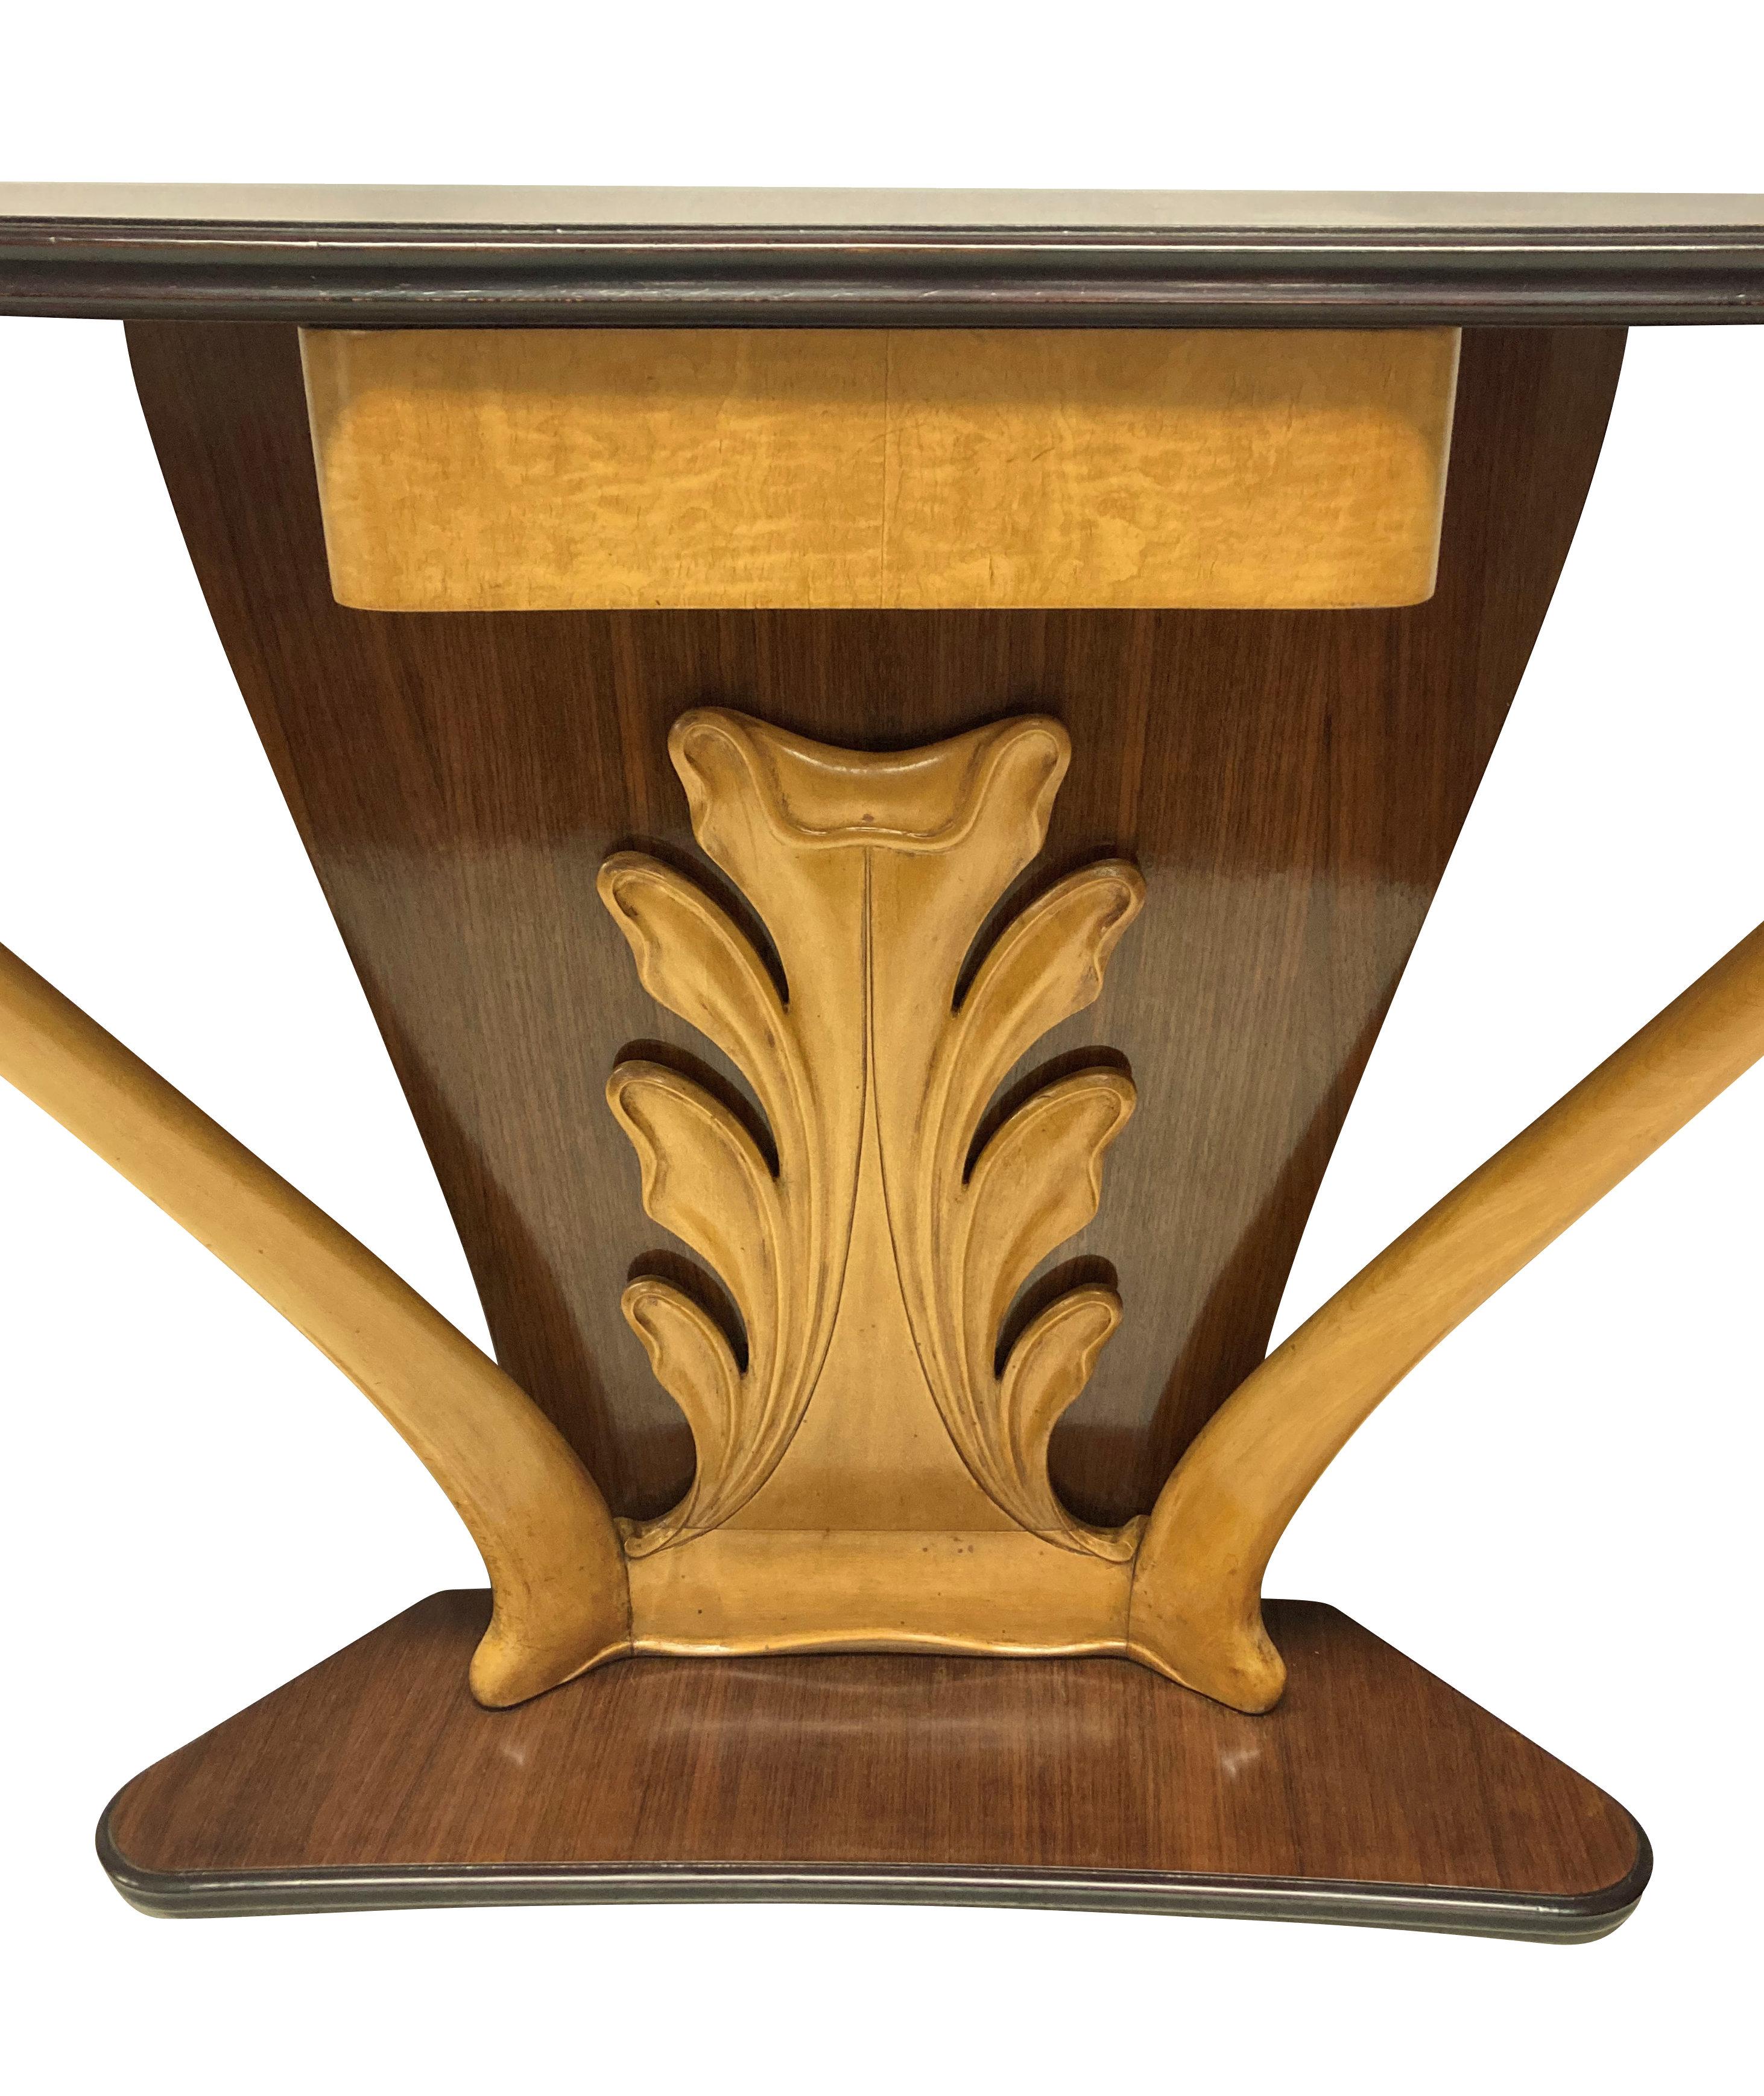 A stylish console table by Borsani of organic form, in walnut, sapele andfruitwood. With a serpentine base and top, the central design, beautifullycarved in a florid manner with a central drawer.